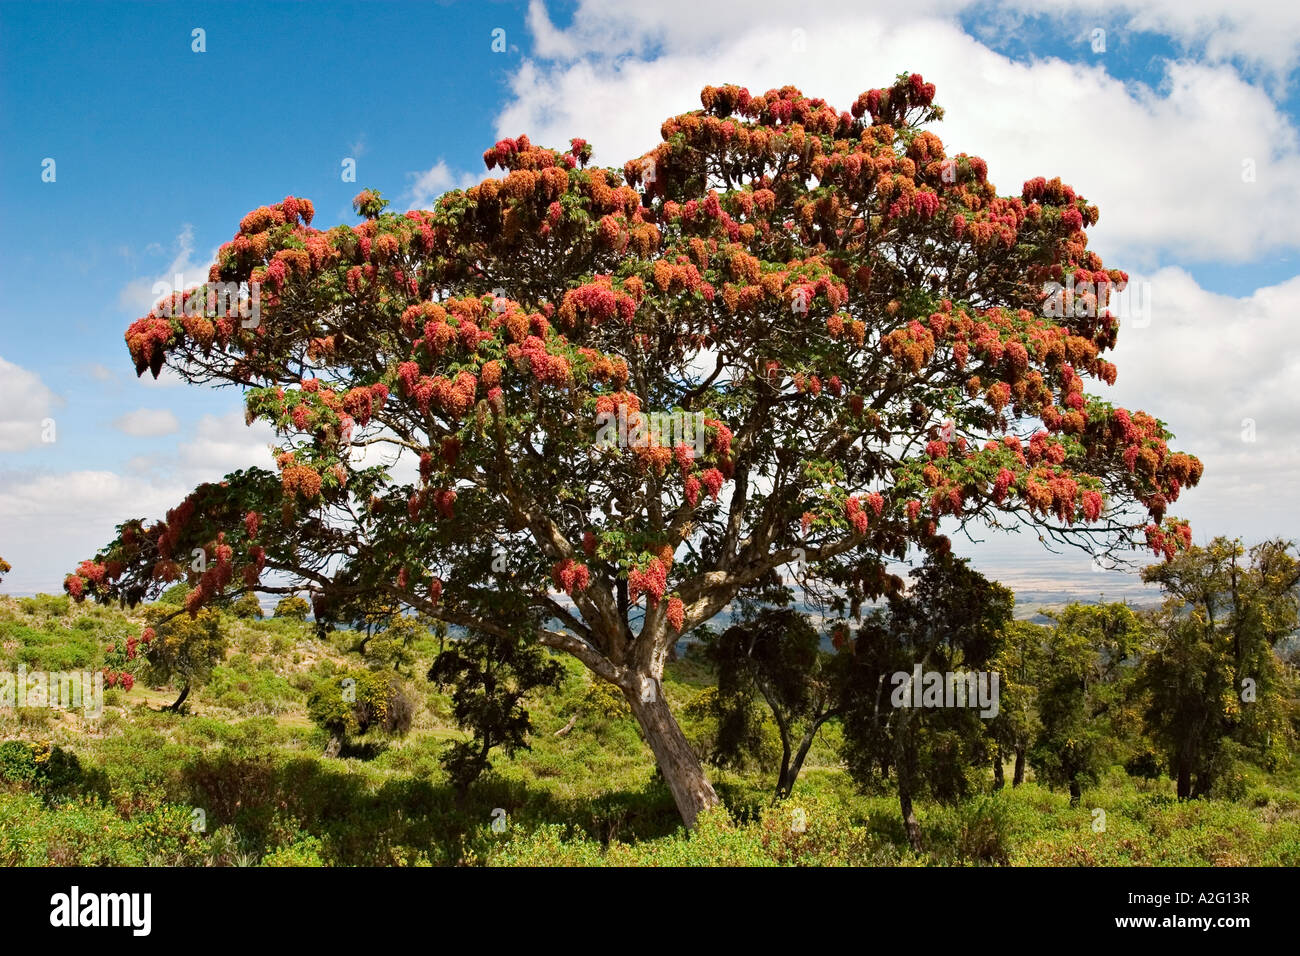 African redwood (Hagenia abyssinica), Bale Mountains National Park, Ethiopia, Africa Stock Photo